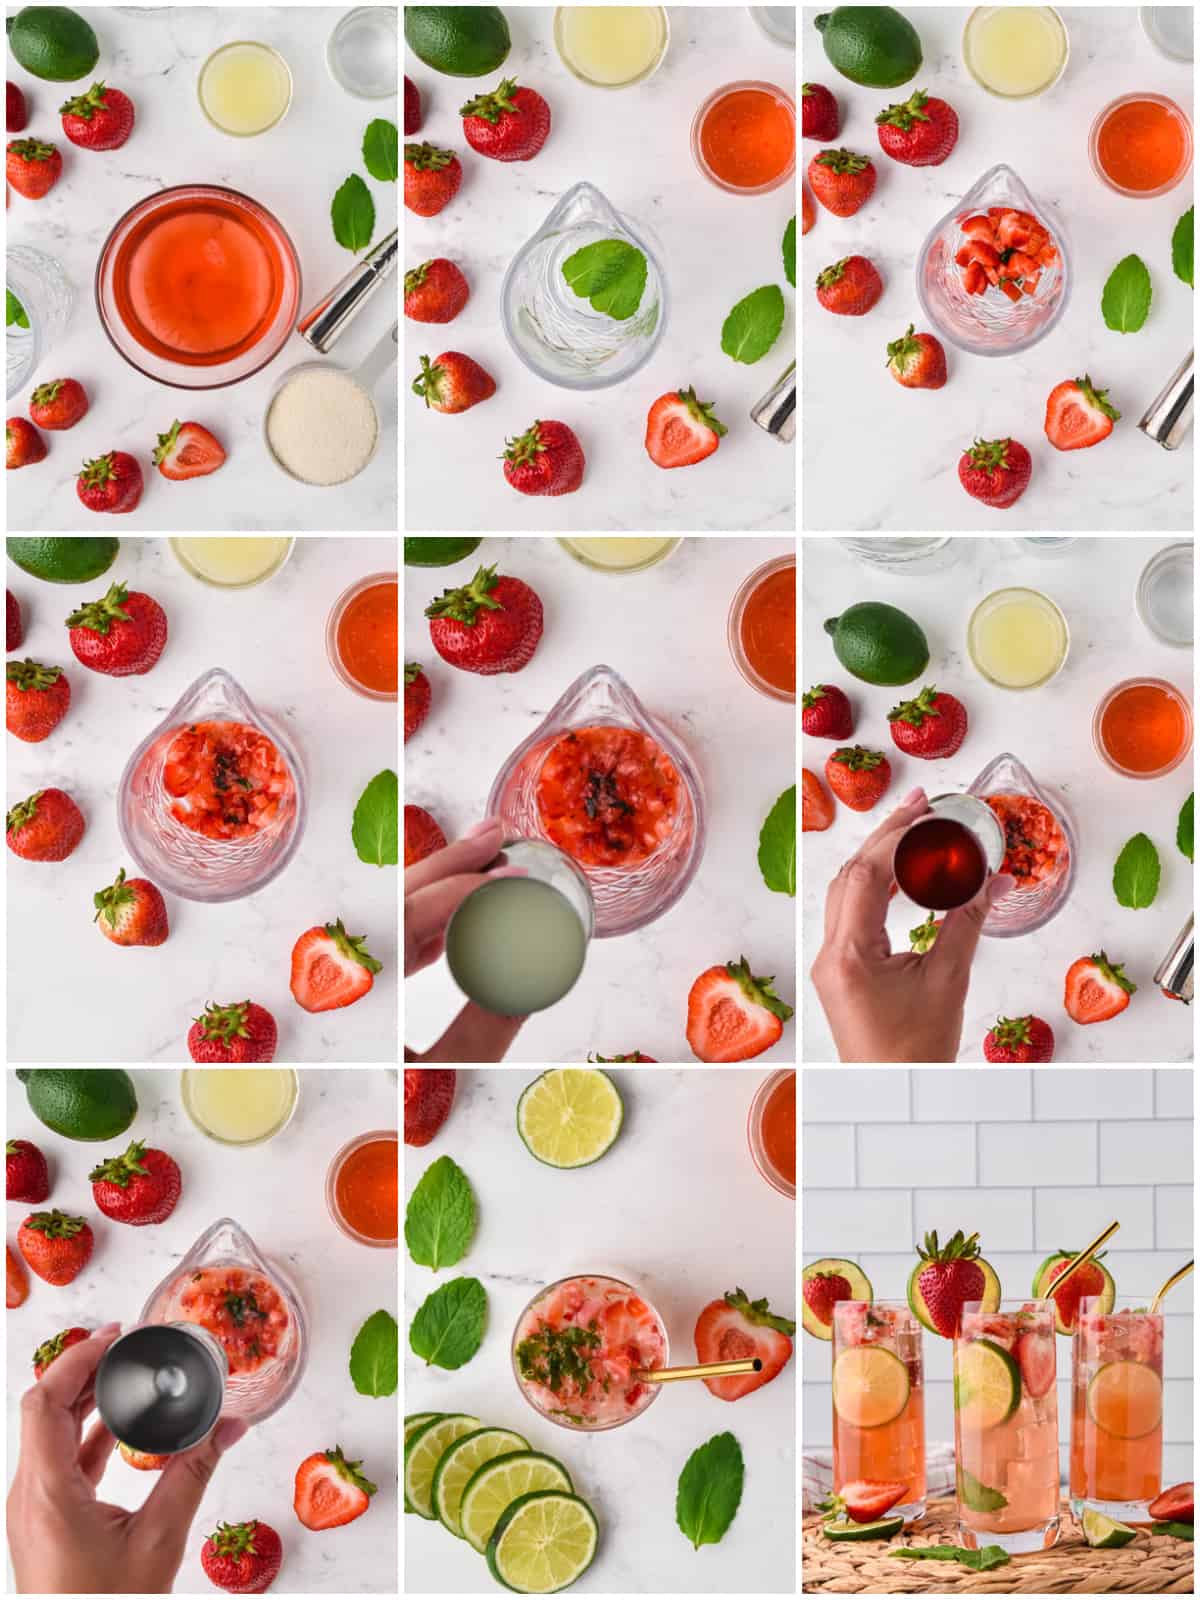 Step by step photos on how to make a Strawberry Mojito.